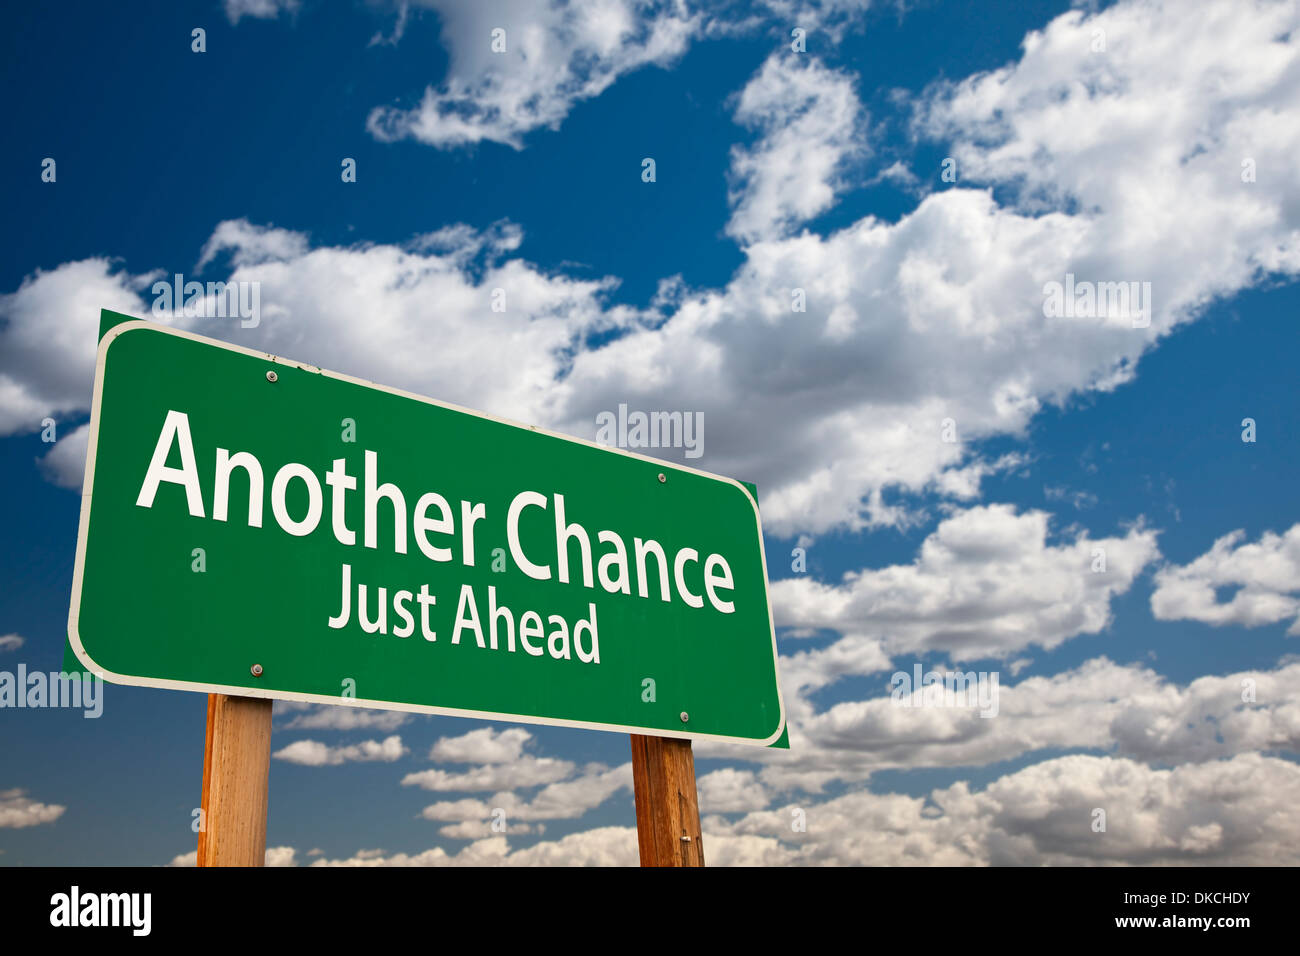 Another Chance Just Ahead Green Road Sign Over Dramatic Clouds and Sky. Stock Photo